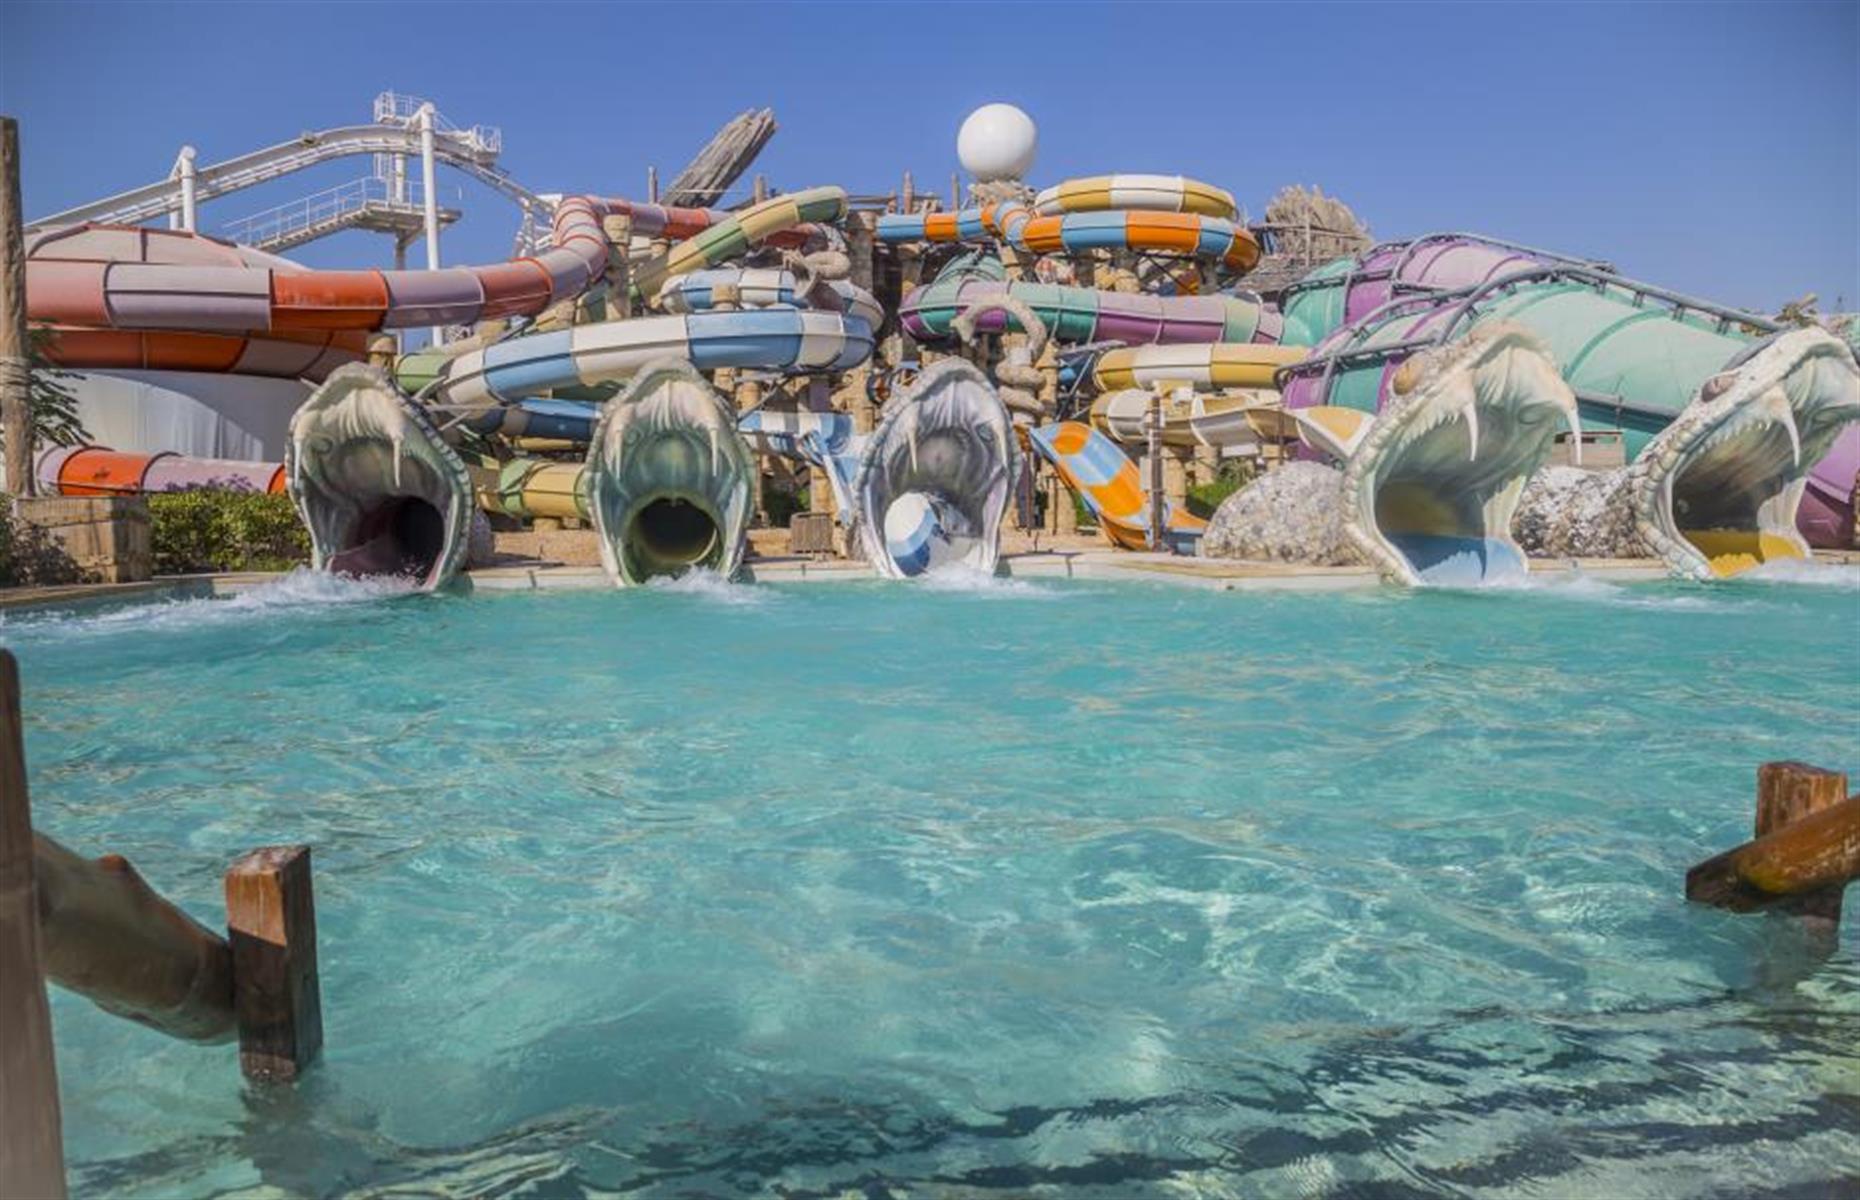 <p>Daredevils will love <a href="https://yasisland.ae/yaswaterworld-abu-dhabi/">Abu Dhabi's vast water-filled attraction</a>, which has no less than 41 rides. Try the near-vertical slide Jebel Drop or gather your mates to try the world's first and largest hydromagnetic-powered six-person tornado waterslide. At over 770-feet-long (235m), the thrills will keep on coming at you. Another highlight is Bubbles Barrel where you can ride 10-foot-high (3m) waves on the world's largest surfable sheet wave. Or take a spin above it all on roller coaster the Bandit Bomber.</p>  <p><a href="http://www.loveexploring.com/gallerylist/77505/the-worlds-most-jawdropping-roller-coasters-you-wont-dare-to-ride"><strong>White-knuckle rides fan? Here are the world's most jaw-dropping roller coasters you won't dare to ride</strong></a></p>